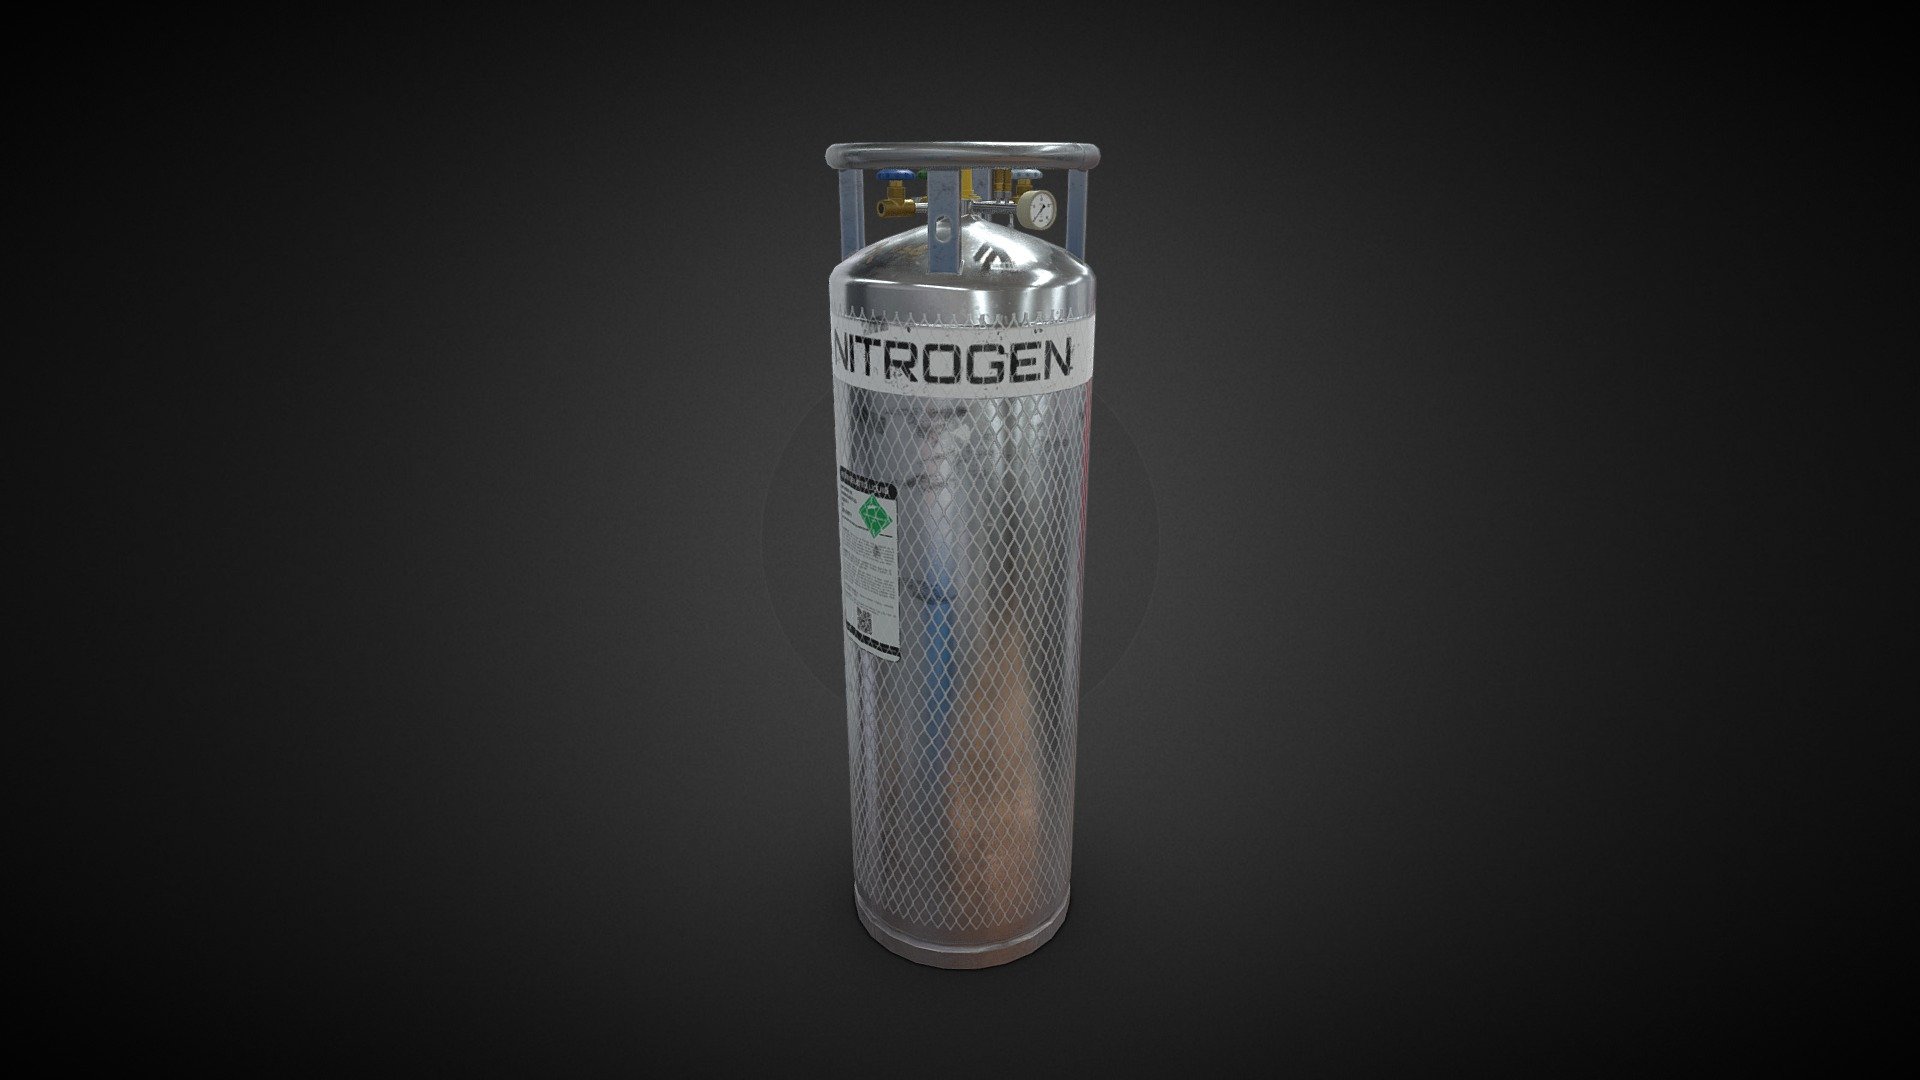 Highly detailed low poly liquid nitrogen tank suitable for industrial visualization, simulation, and games.

Technical Features:




PBR Textures: base color, roughness, metallic, and normal map

Polys: 5111 (9964 tris)

Real-world scale based on references

All branding and labels are custom made

Formats included: .blend / .fbx / .obj

Textures




This model includes two sets of textures, with and without the white packing net.

Number of textures: 8

Texture format: PNG

Texture size: 4096 x 4096

The model can be used in any game, personal project, ArchViz, etc. It may not be reselled or redistributed 3d model